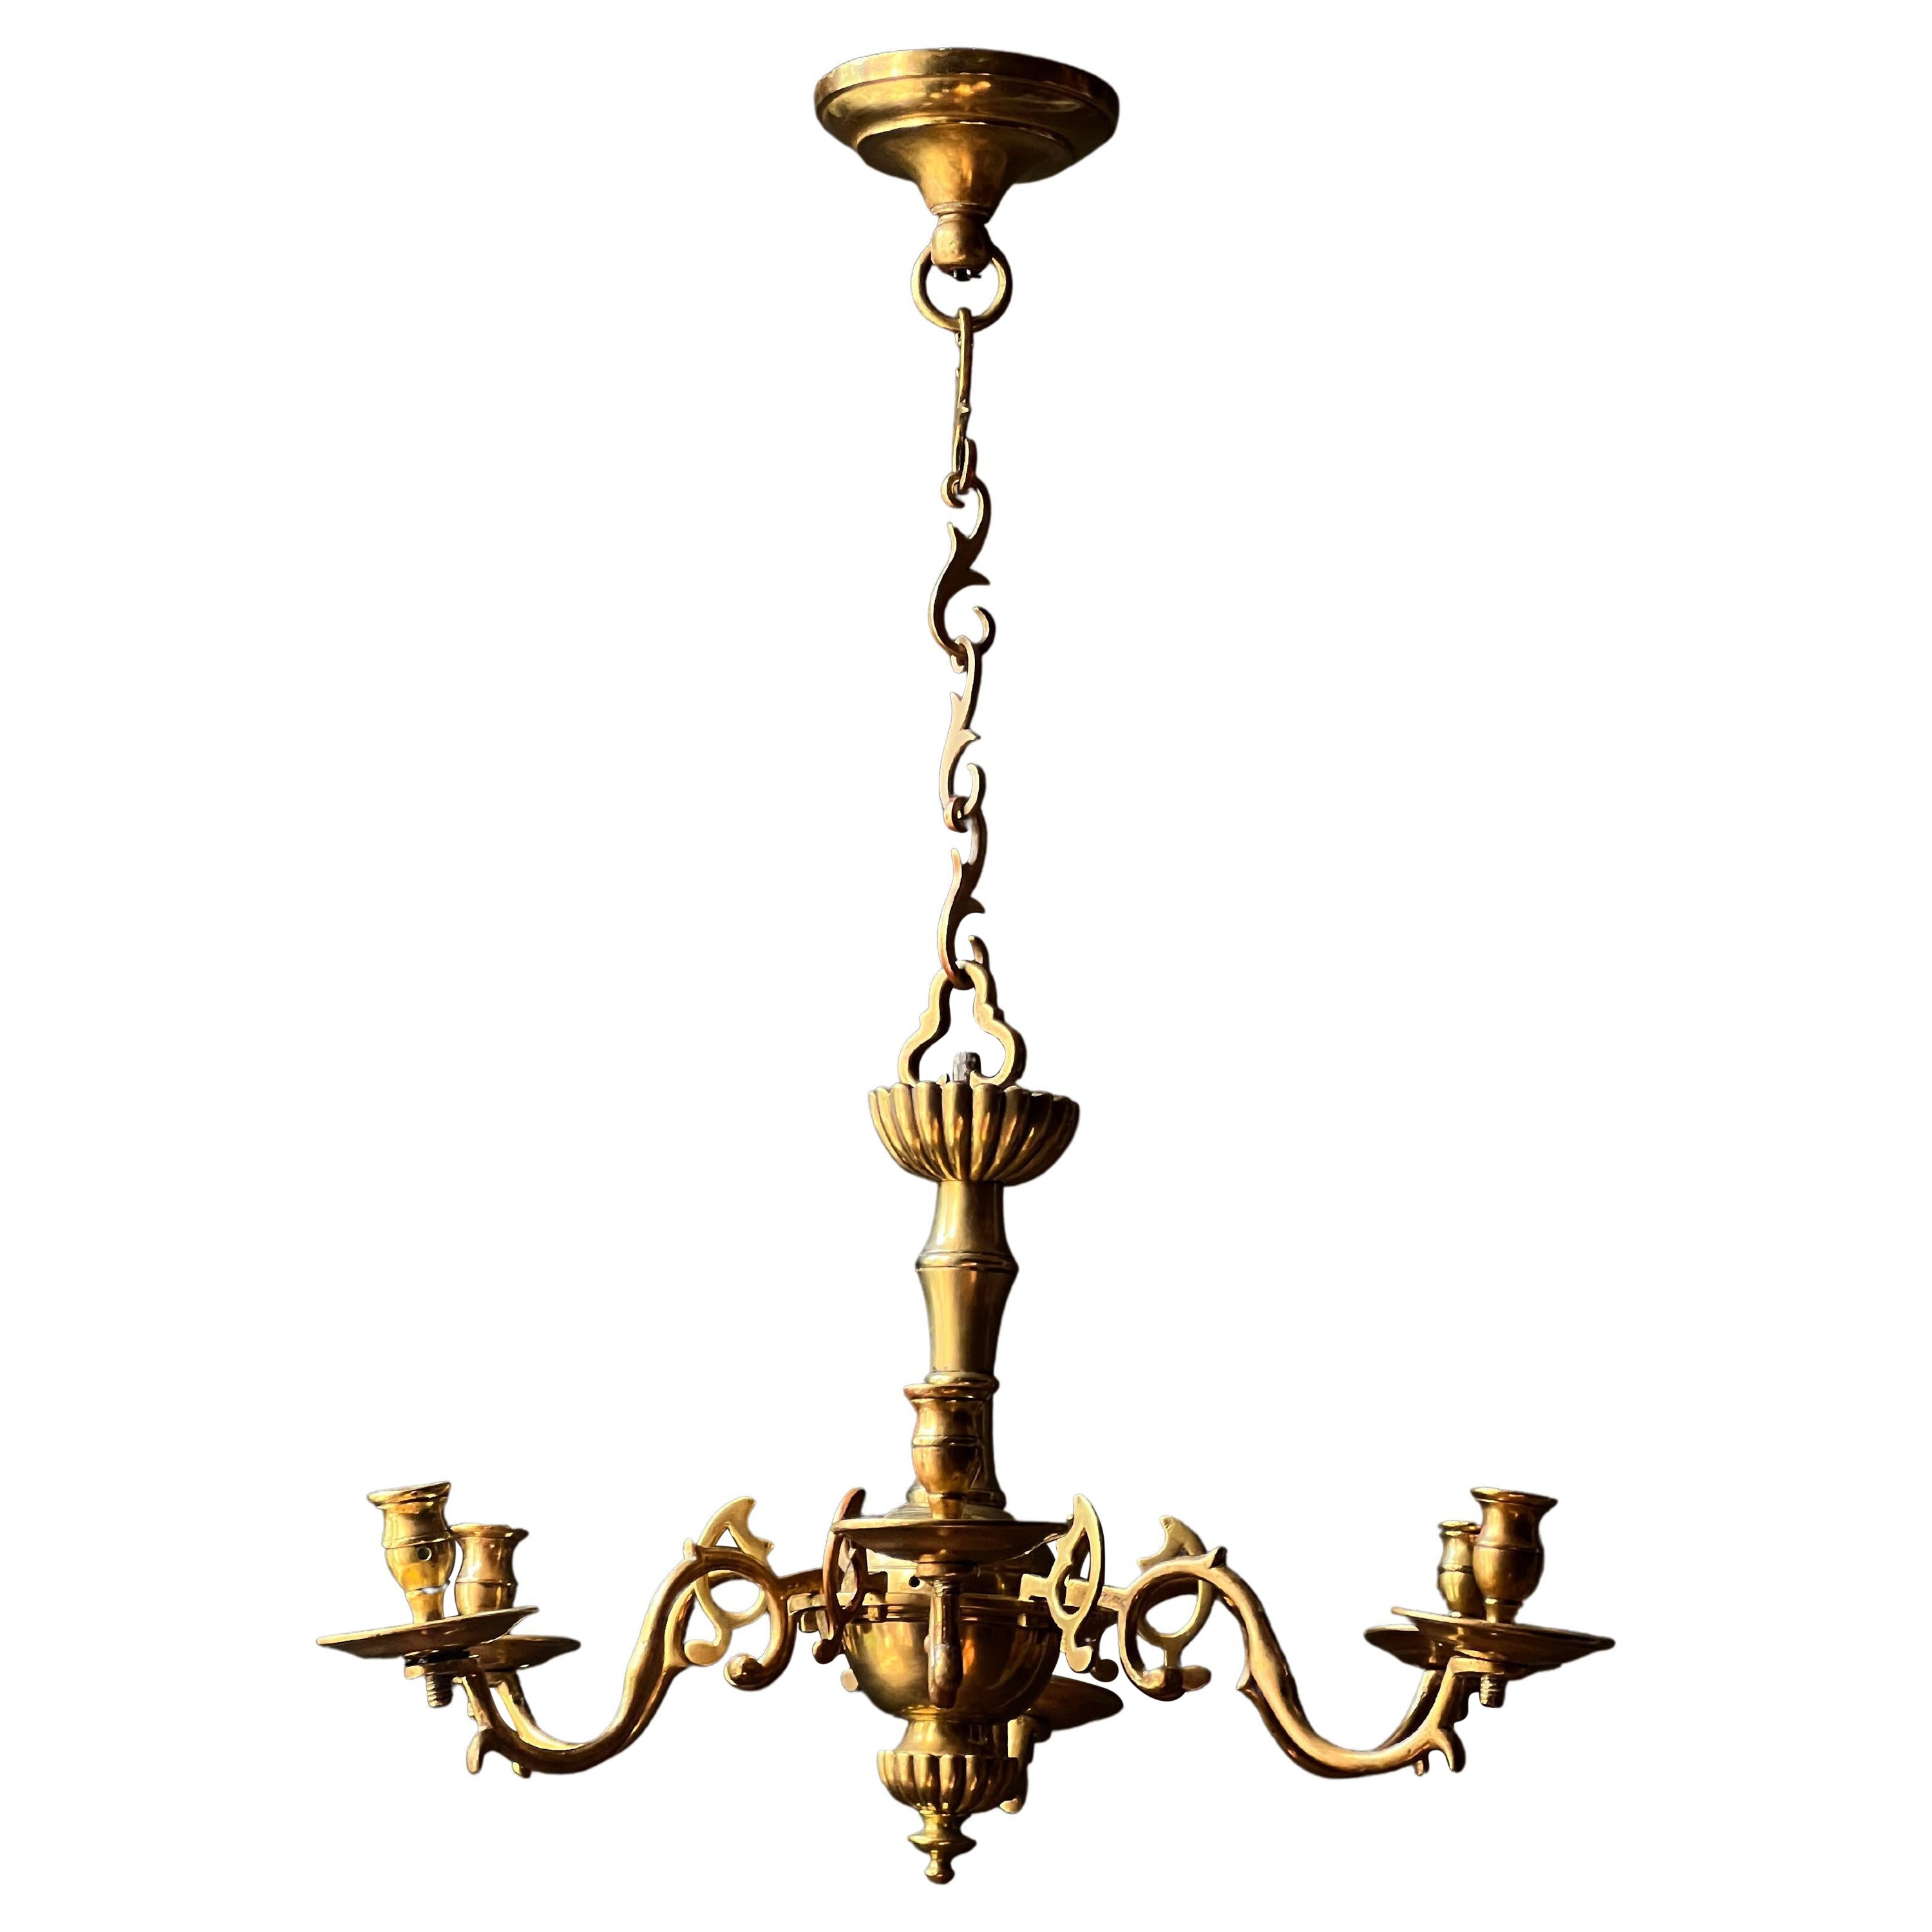 Mid-18th Century English Brass Six-light Chandelier For Sale